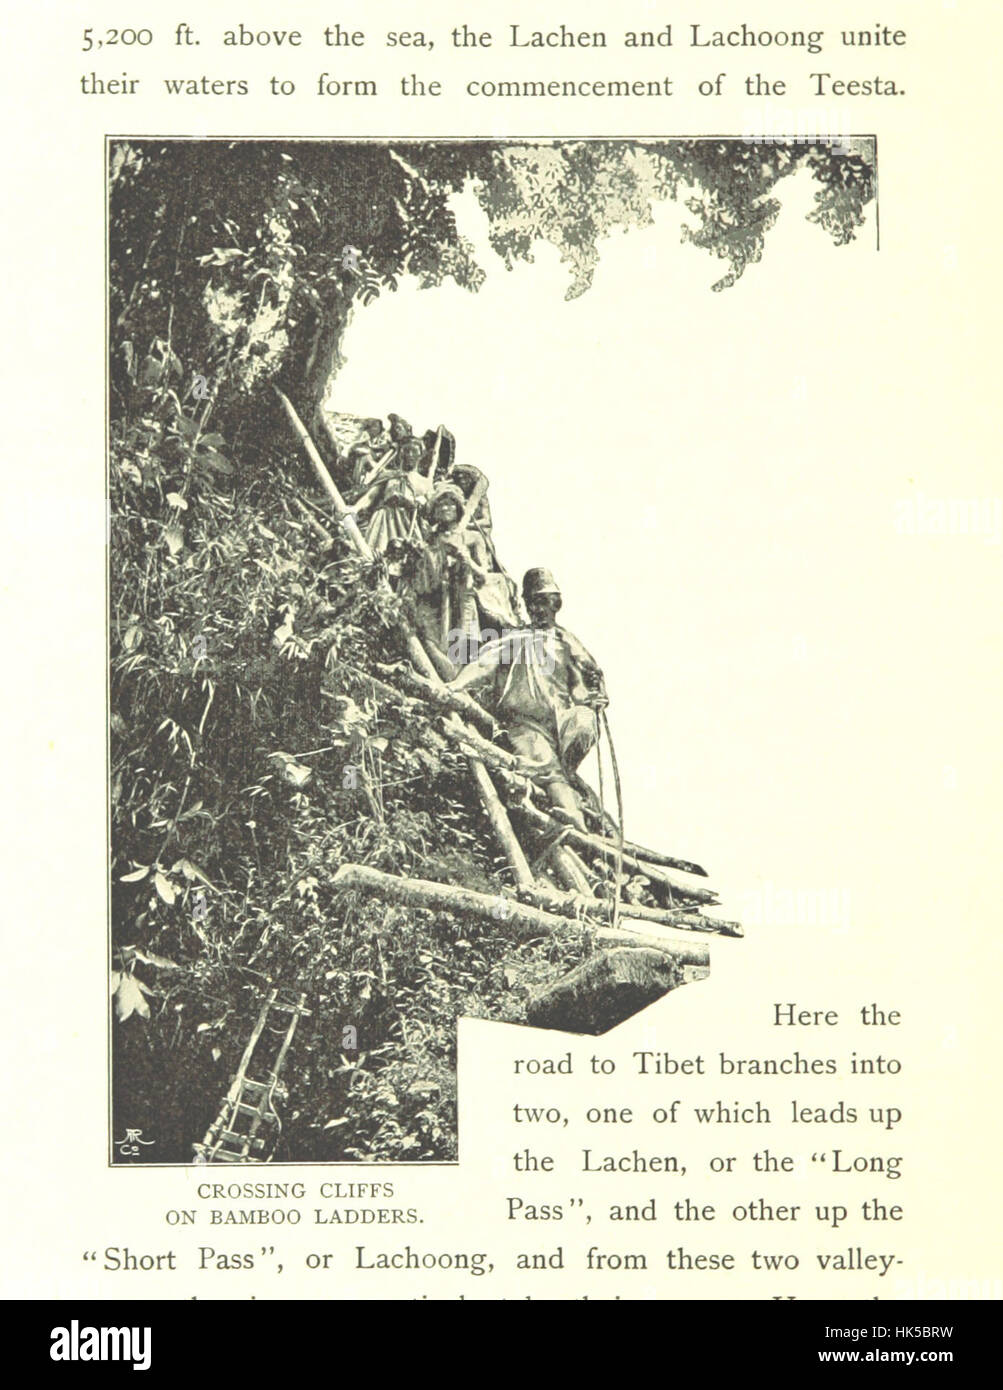 Image taken from page 182 of 'Among the Himalayas ... With numerous illustrations by A. D. McCormick, the author, etc' Image taken from page 182 of 'Among th Stock Photo